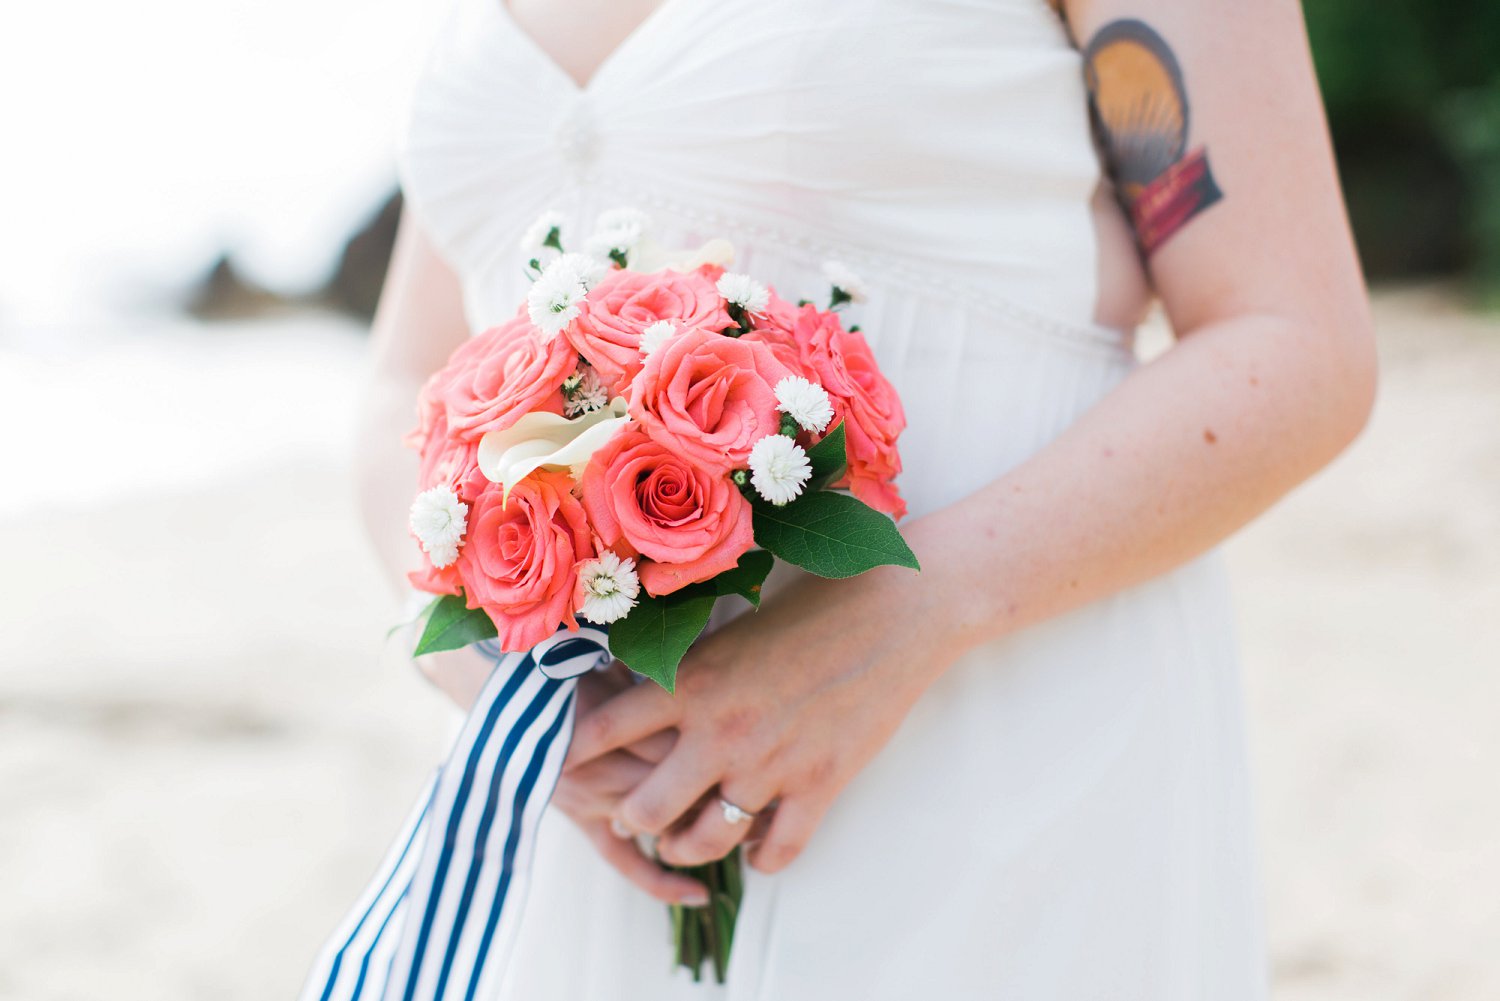 Coral rose bouquet with blue and white striped ribbon for tropical destination beach wedding.